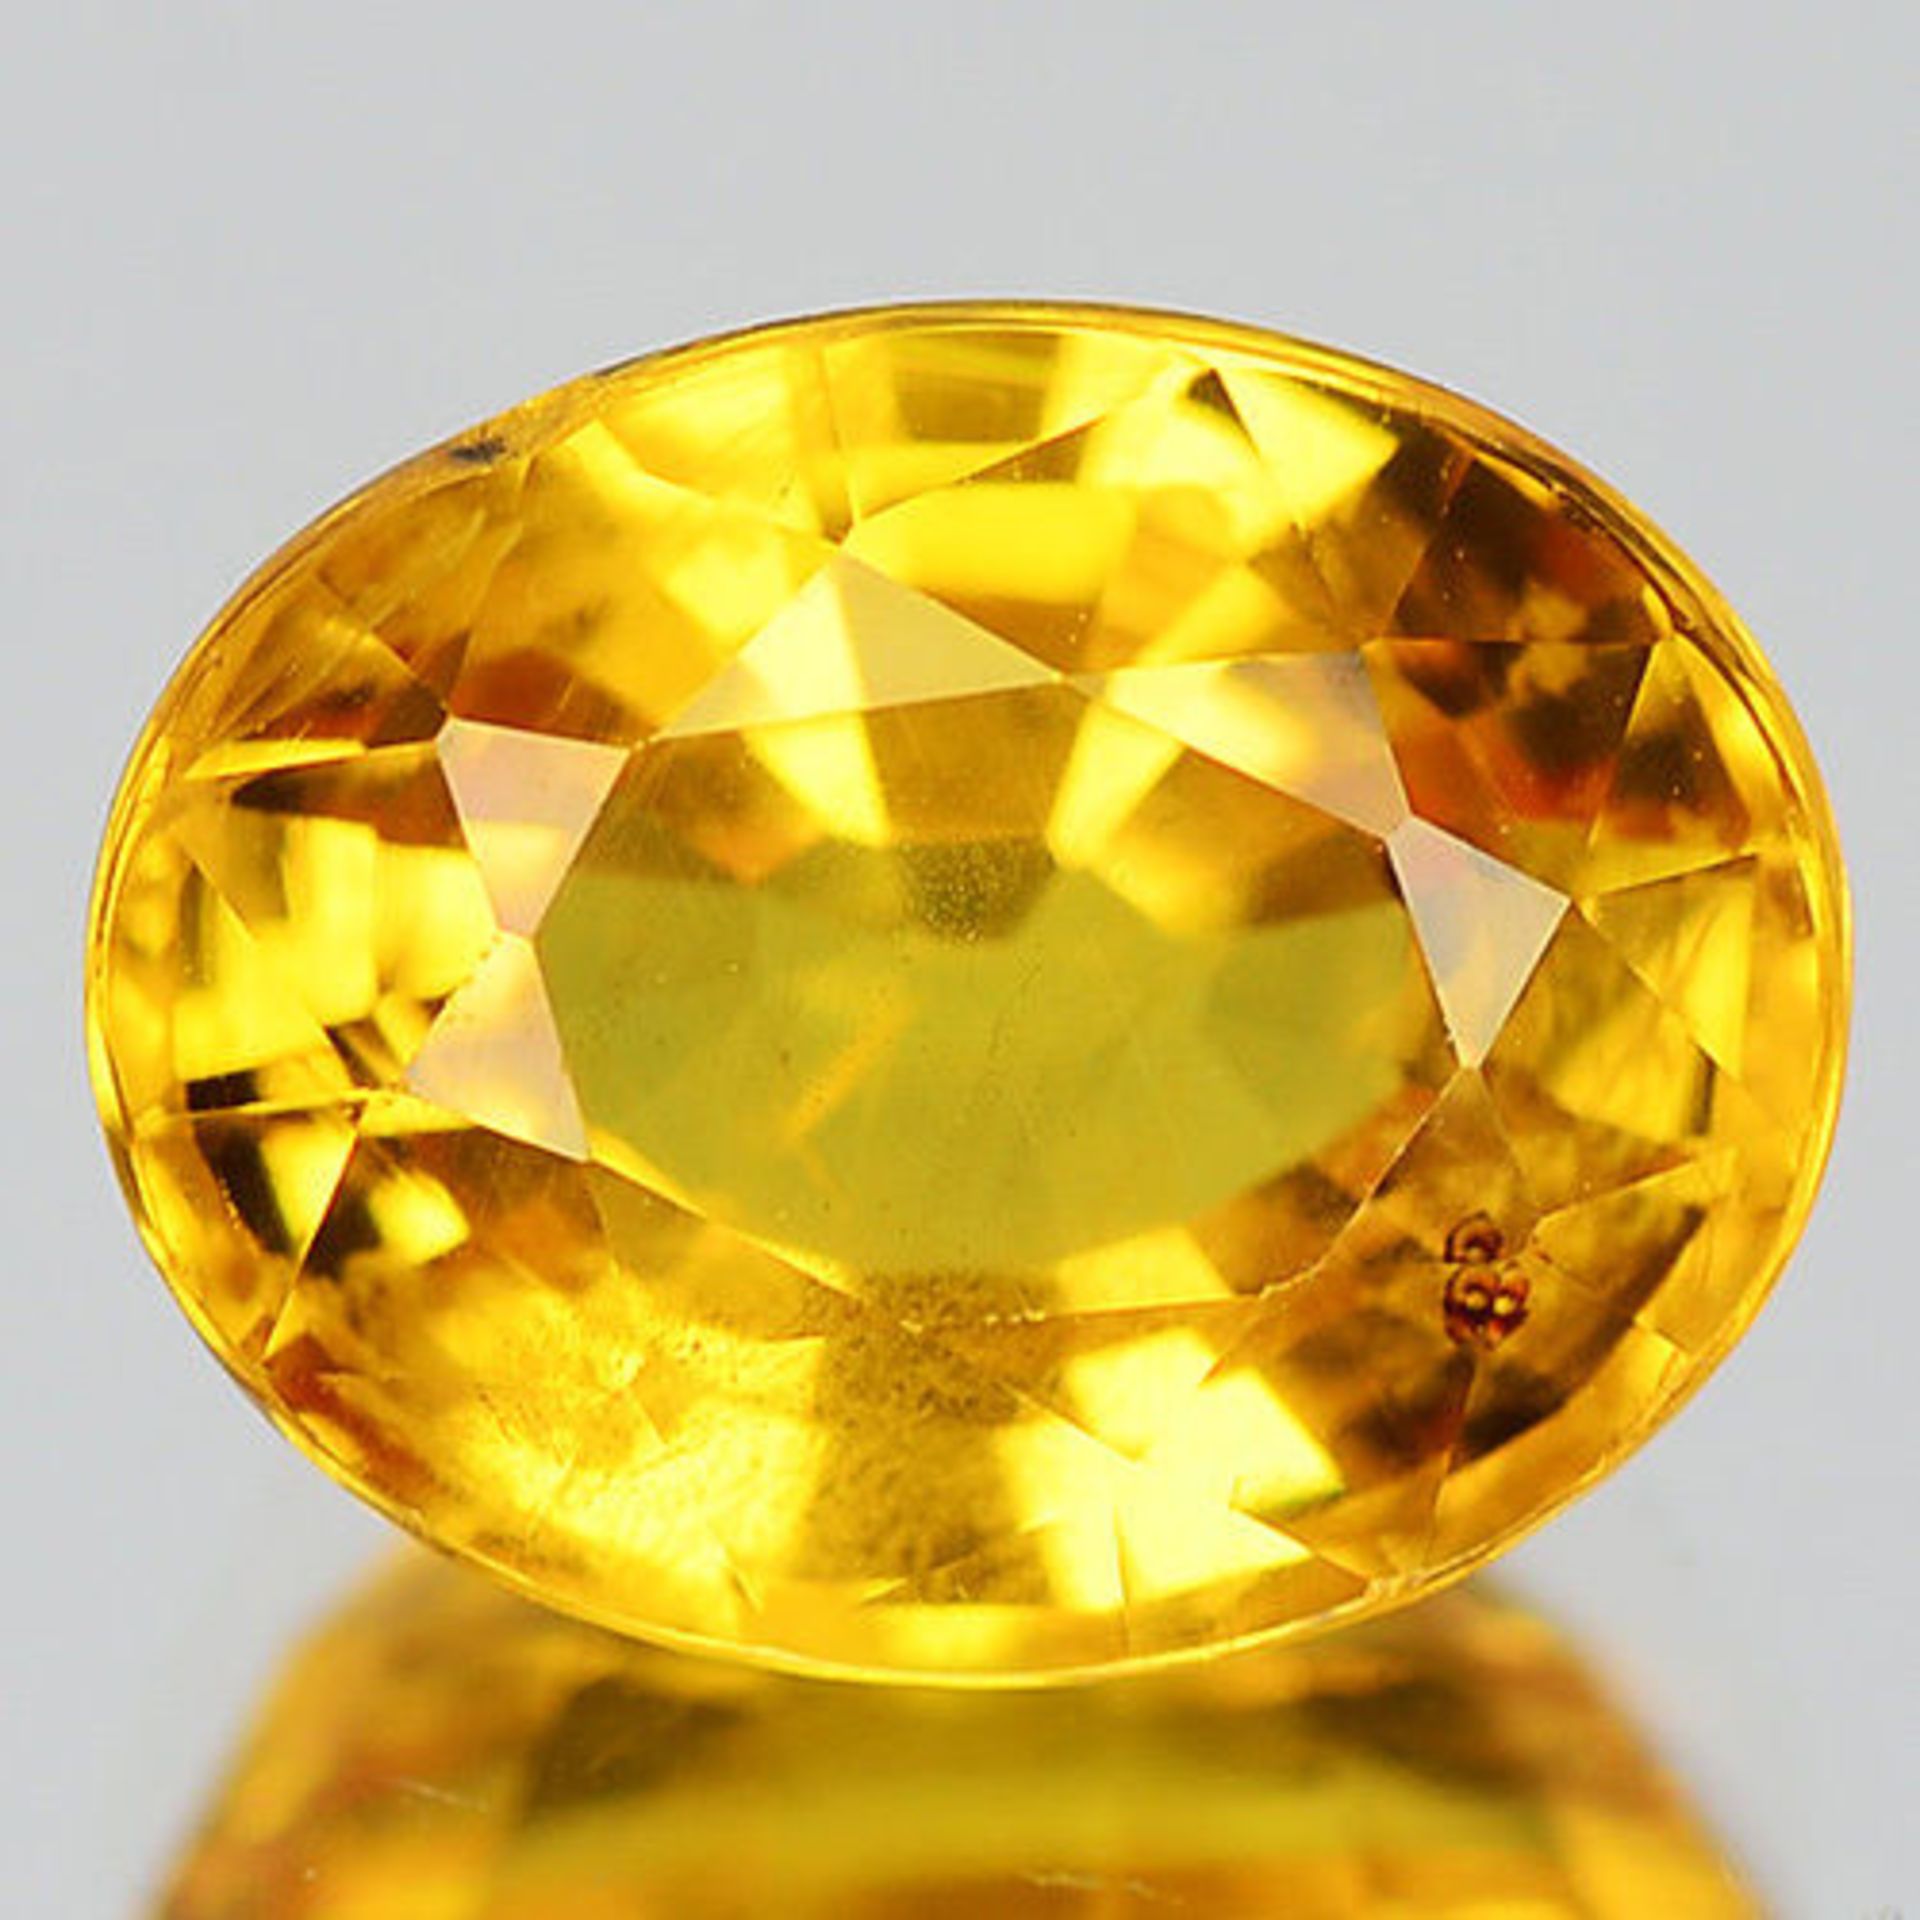 Sapphire Yellow 2.3ct Gem With Certificate - Gem Valued At $1337.61 (Approx £877.43)